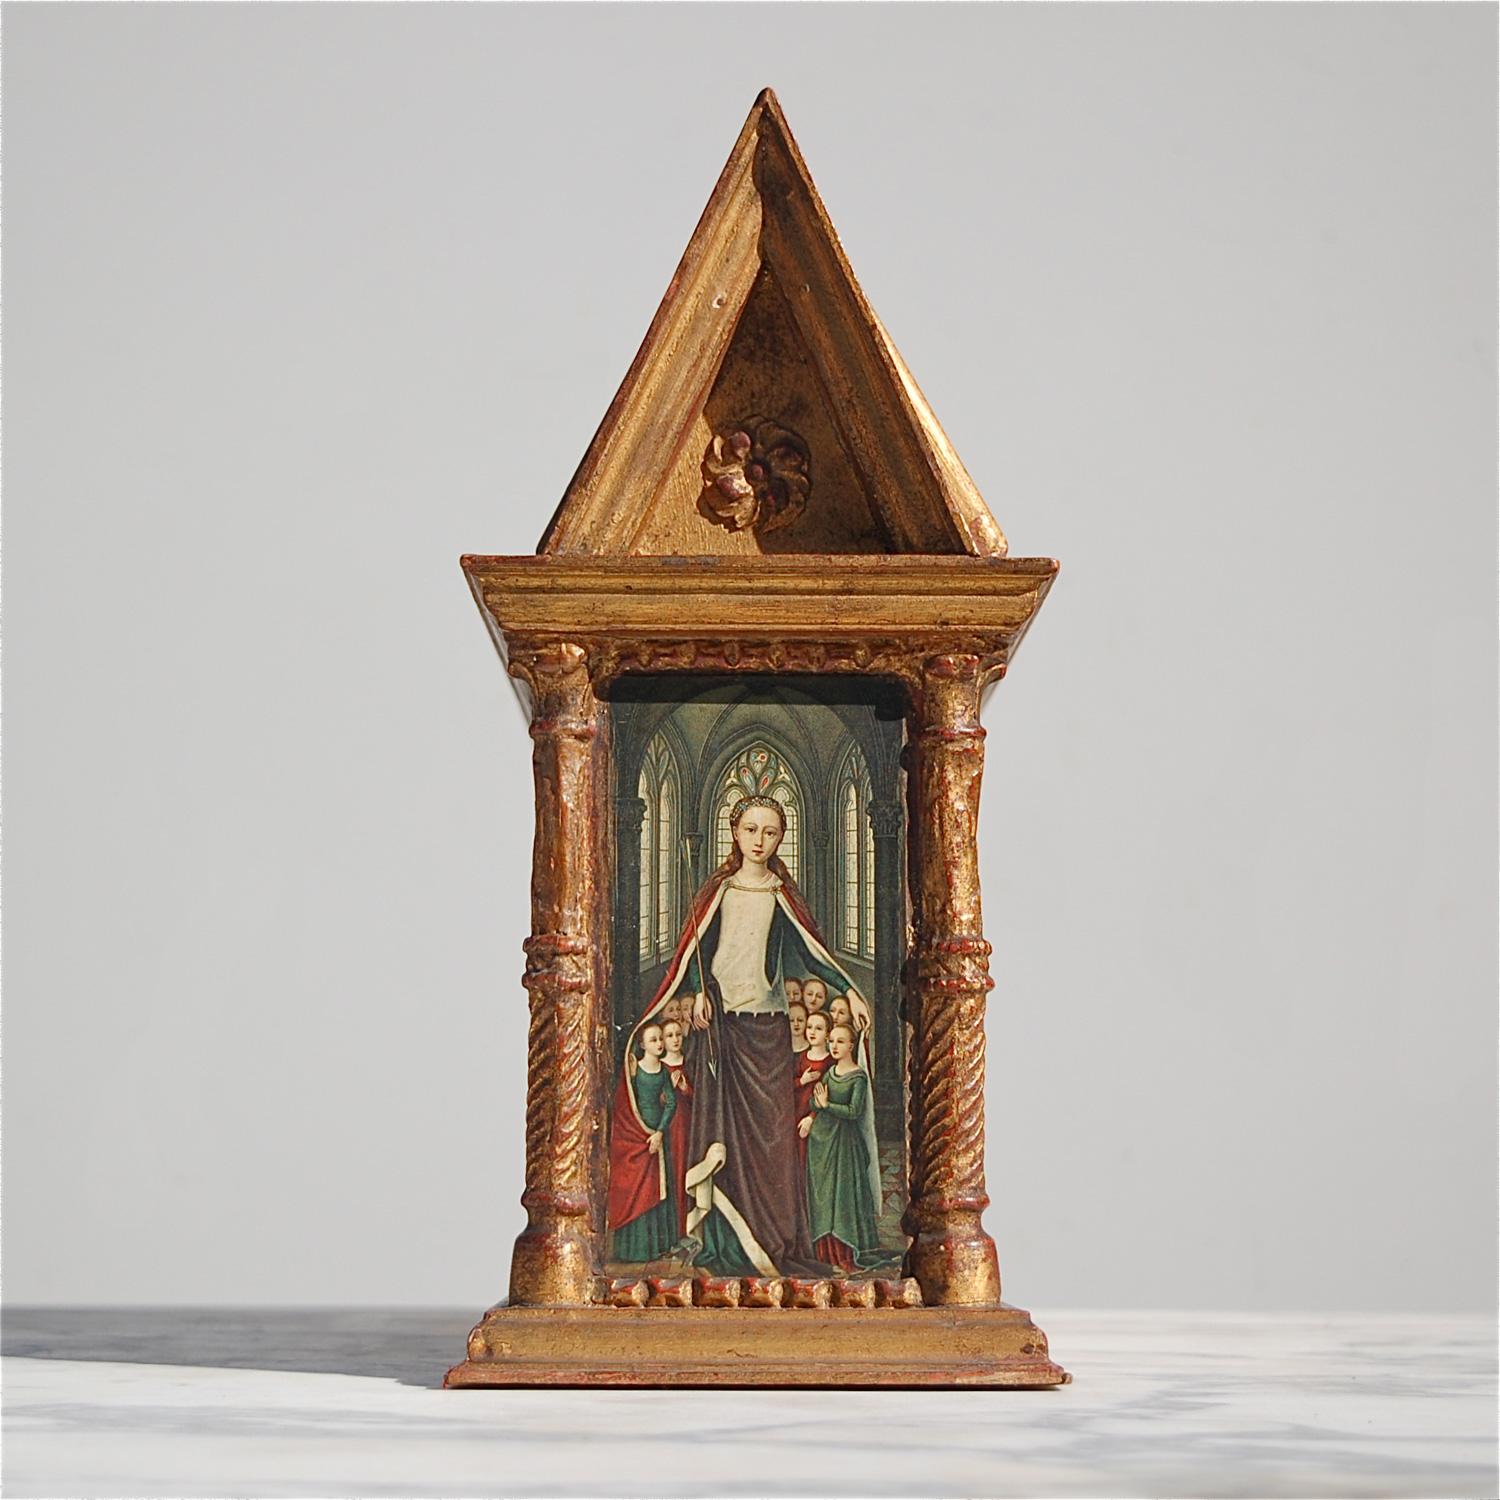 A rare, neo-gothic style miniature replica of the Sint Ursula shrine made by an unknown craftsman in the middle of the 20th century. It is constructed from oak and decorated with pillars, rosettes and other mouldings with patinated gold coloured